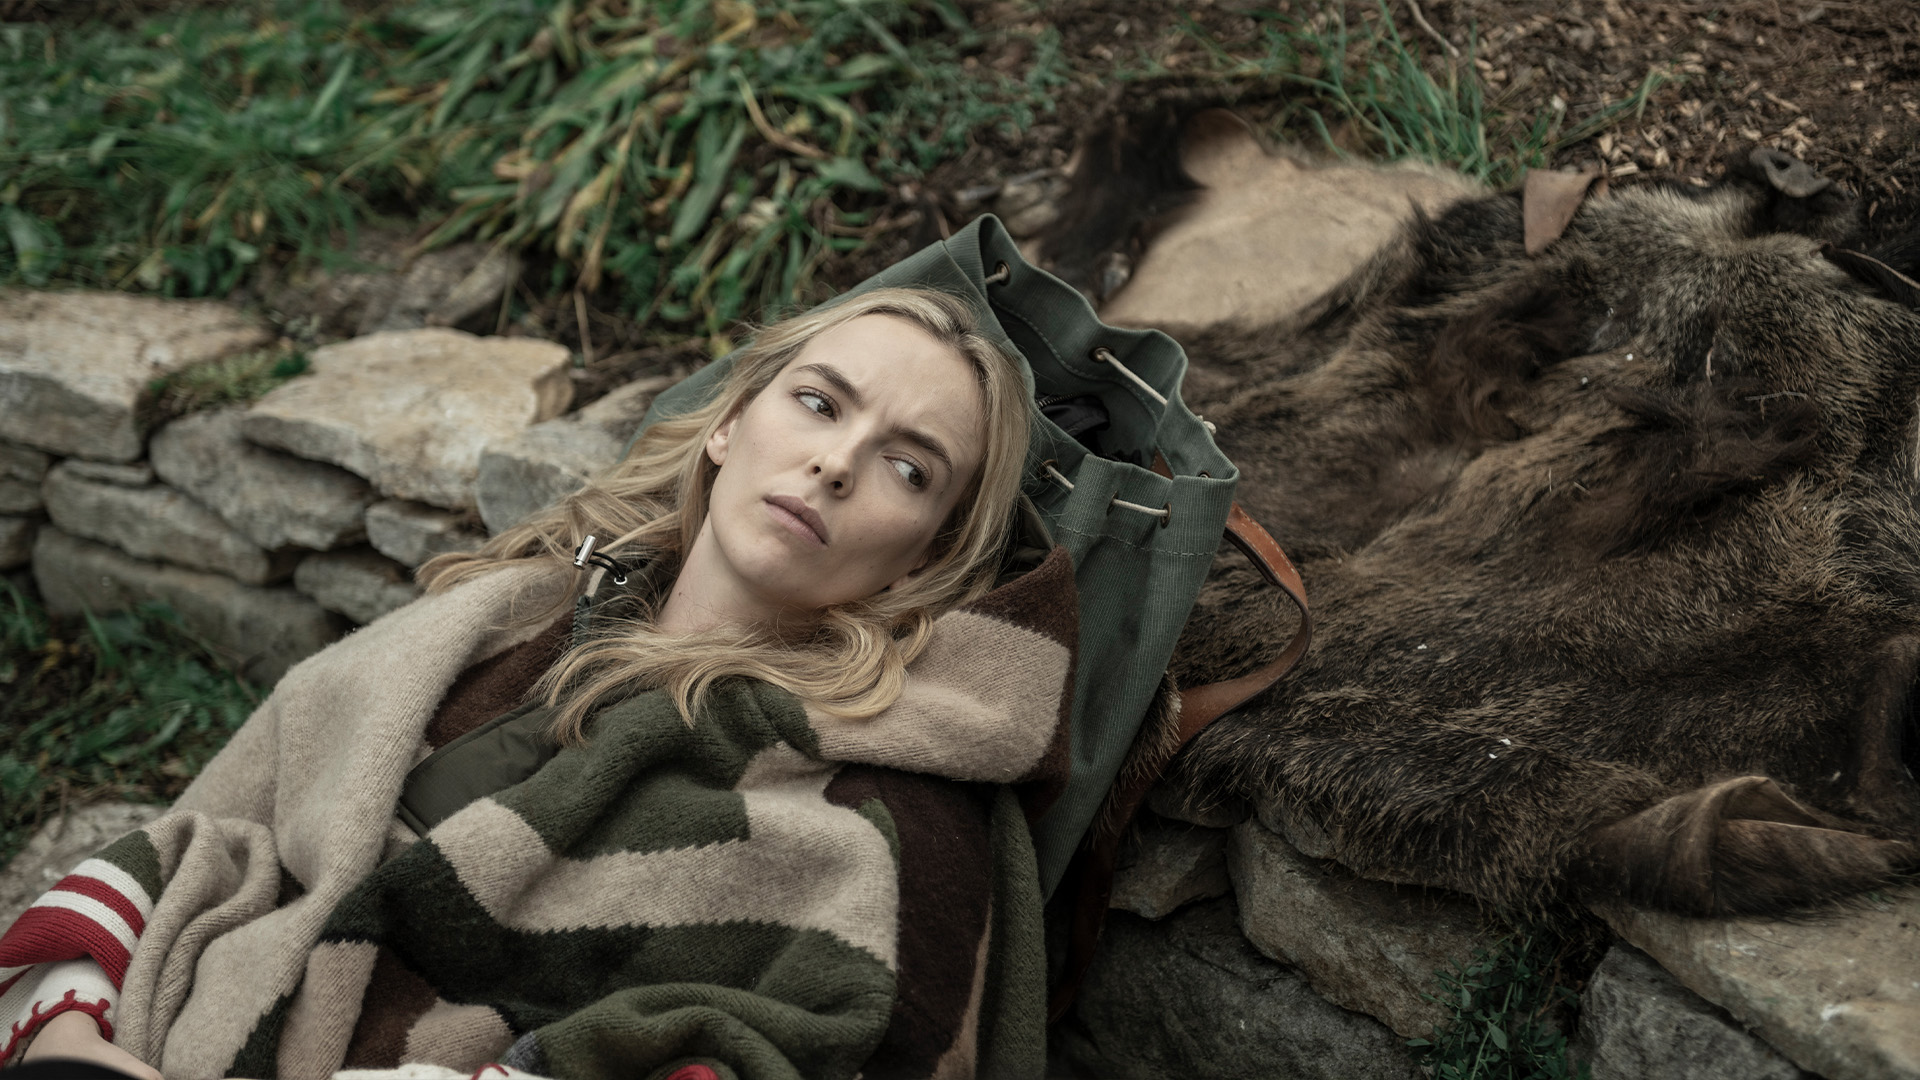 Making Dead Things Look Nice, Eve's mission grows - she'll need Villanelle's help., TV-14, Season 1052528, Episode 7